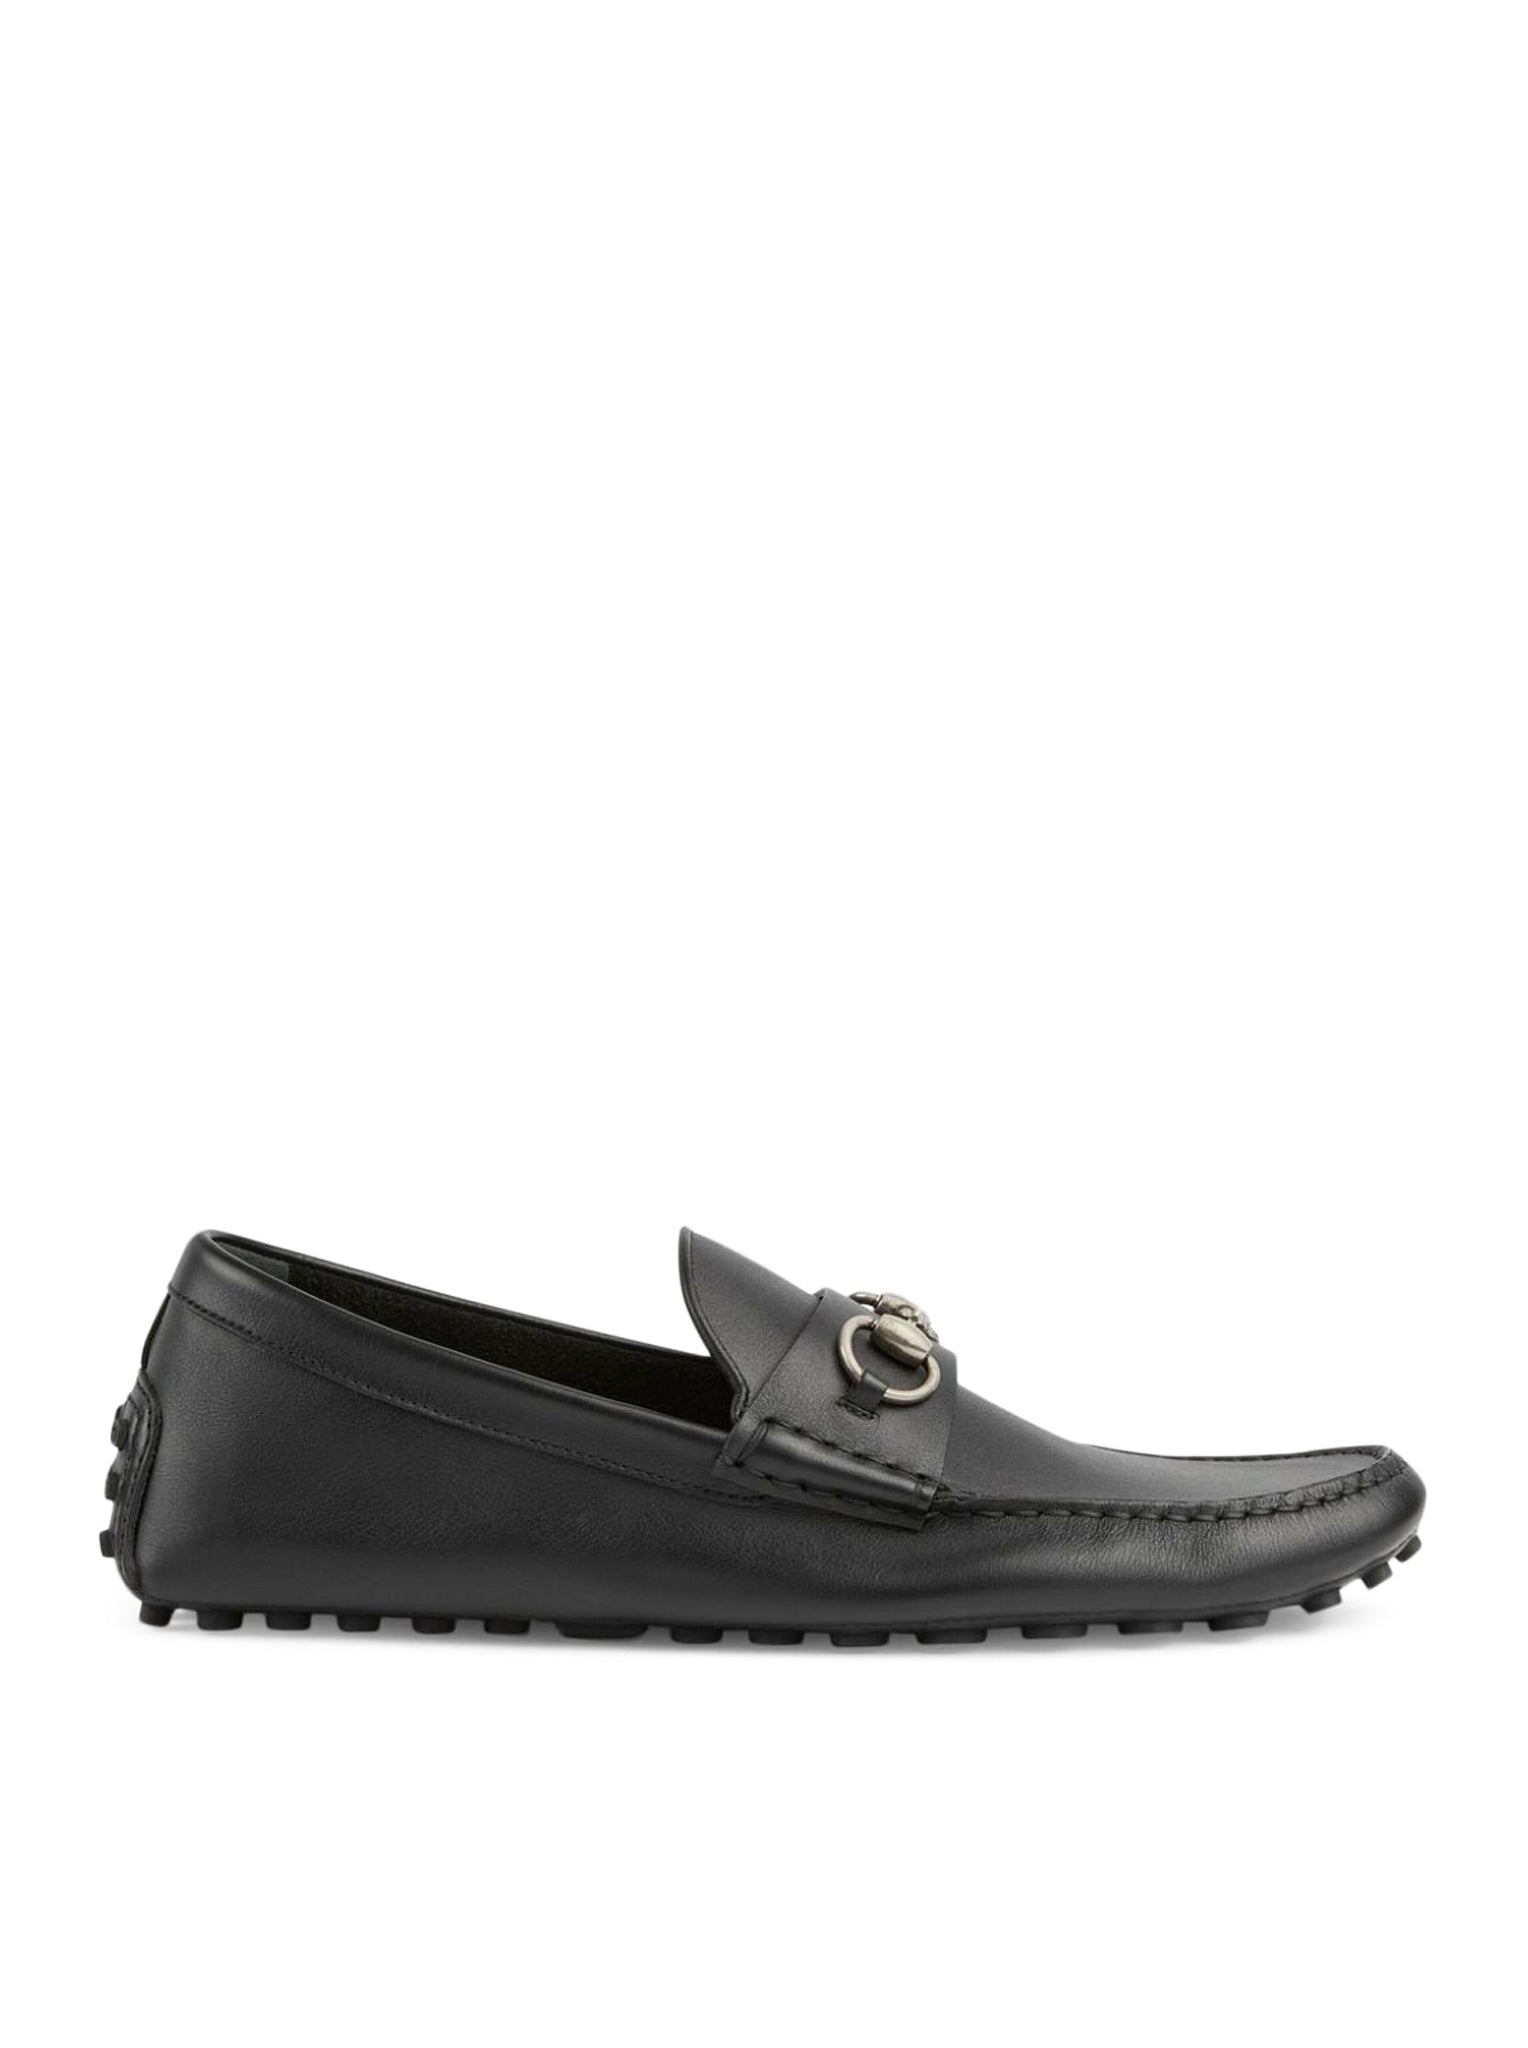 MEN`S DRIVER MOCCASIN WITH CLAMP